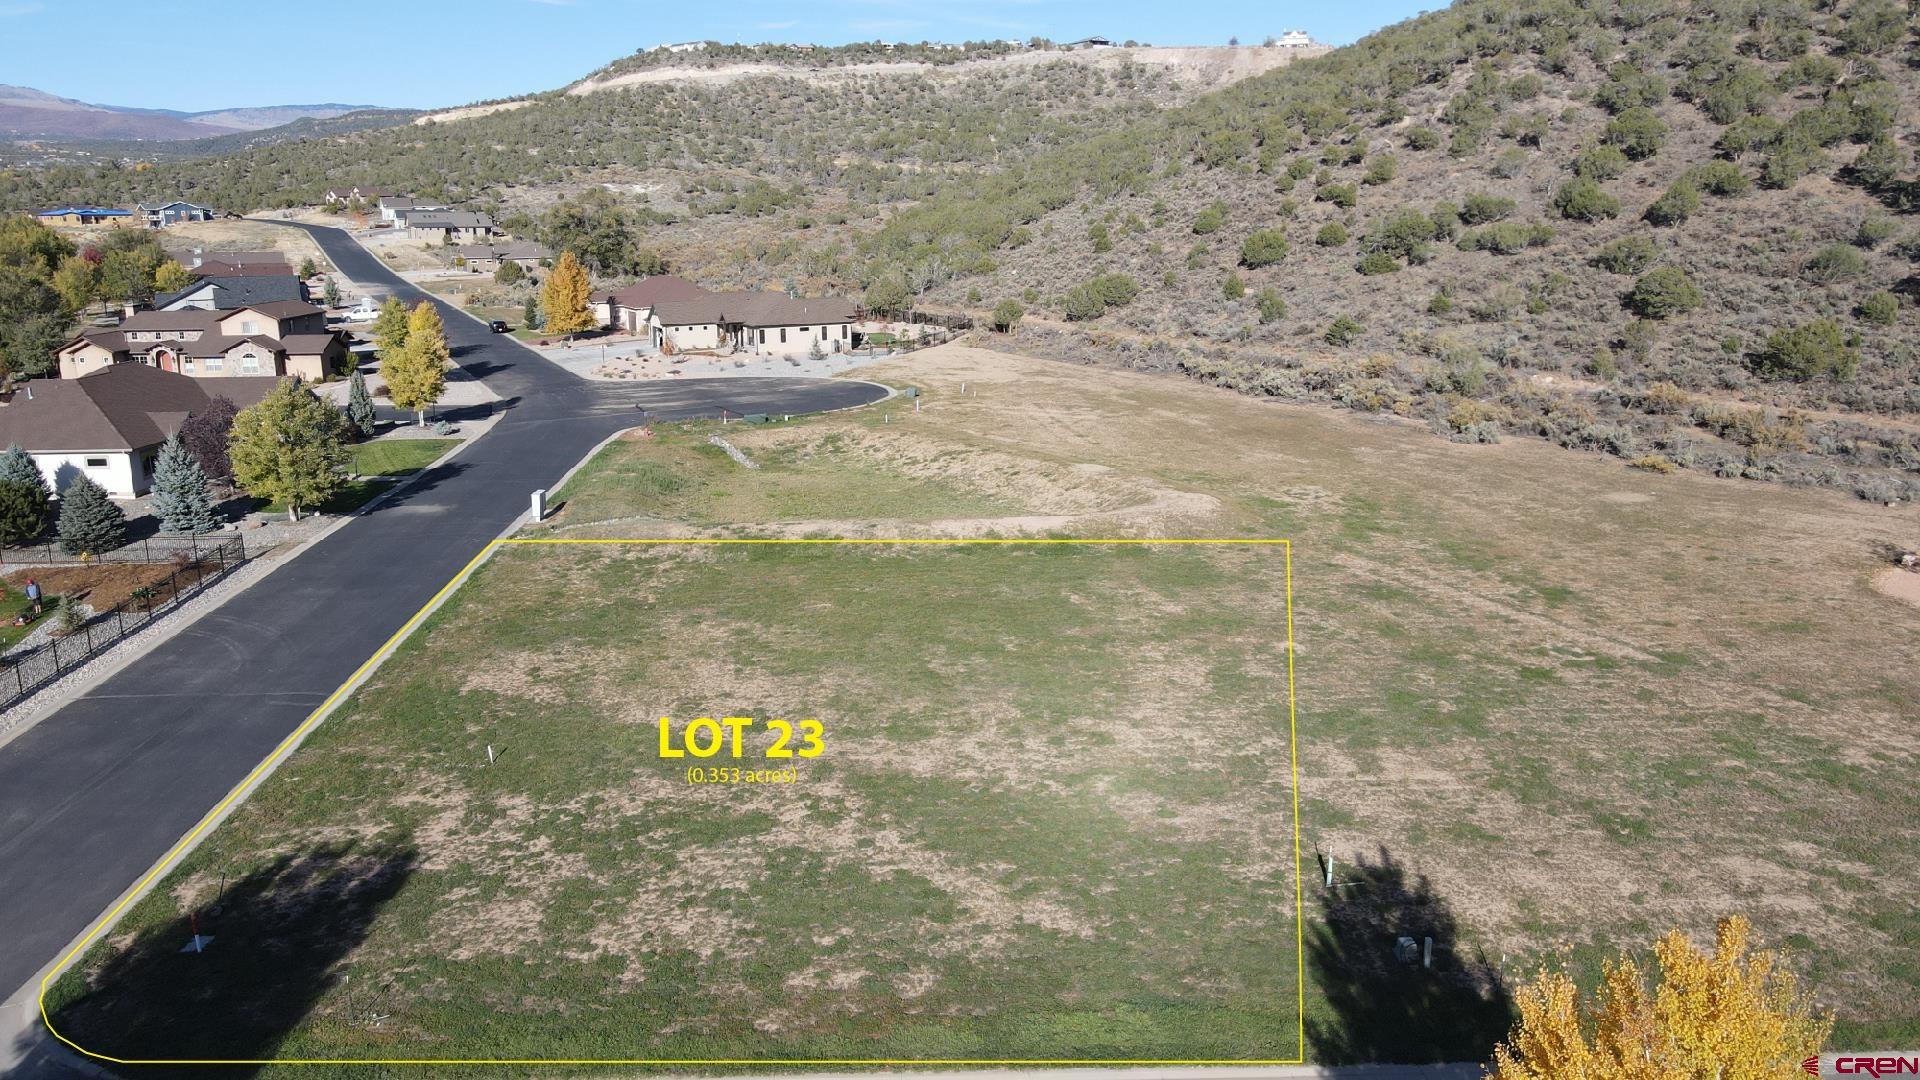 Large corner lot located in the very desirable Deer Creek Village Golf Course Community.  All utilities are to the lot with water and sewer taps available to purchase through the Town of Cedaredge. High speed, fiber optic internet alsoavailable. Close to all amenities, medical, schools, grocery store, restaurants and the Grand Mesa Art Center. Great views of the Grand Mesa, the largest flap top Mesa in the world, with over 300 lakes, hiking, cross-country skiing, down hill skiing, snowmobiling, camping, snowshoeing, etc., only a 30 minute drive.  Within walking distance to the Cedaredge 18-Hole Public Golf Course.  Beautiful scenic walking trail along the constant flowing Surface Creek for those morning and afternoon strolls.  This lot backs up to an open space which allows more room for privacy.  Come "Share Paradise With Friends and Neighbors".  Vacant lot 24 is also available to purchase MLS #799136.  RV/Boat storage available through the HOA.